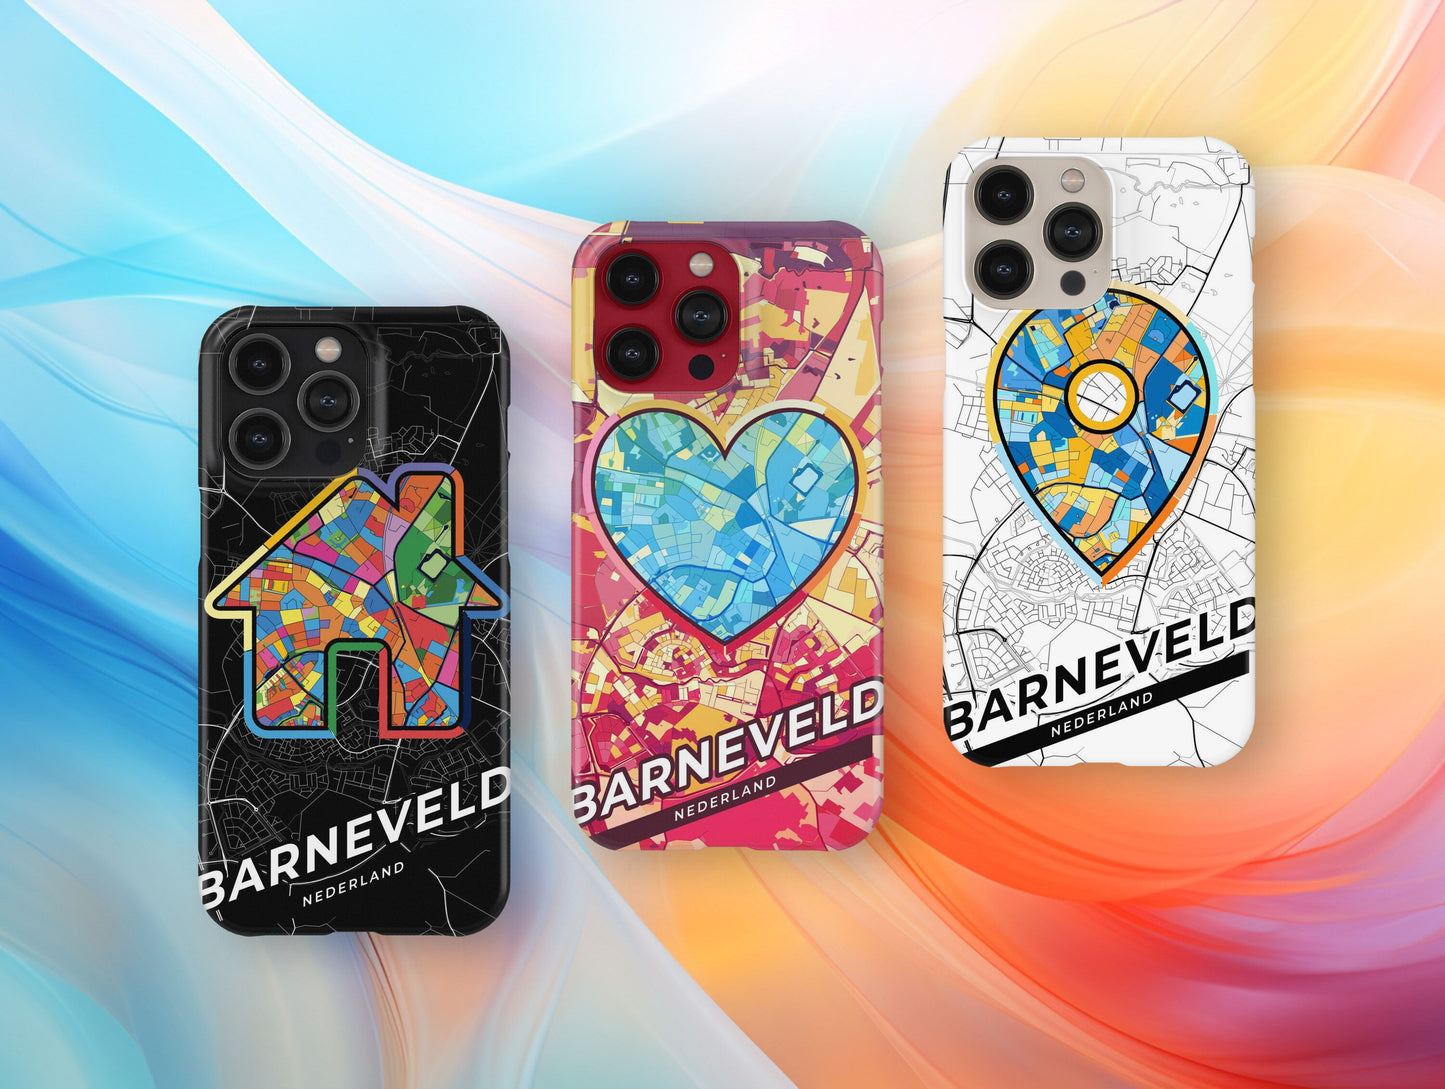 Barneveld Netherlands slim phone case with colorful icon. Birthday, wedding or housewarming gift. Couple match cases.